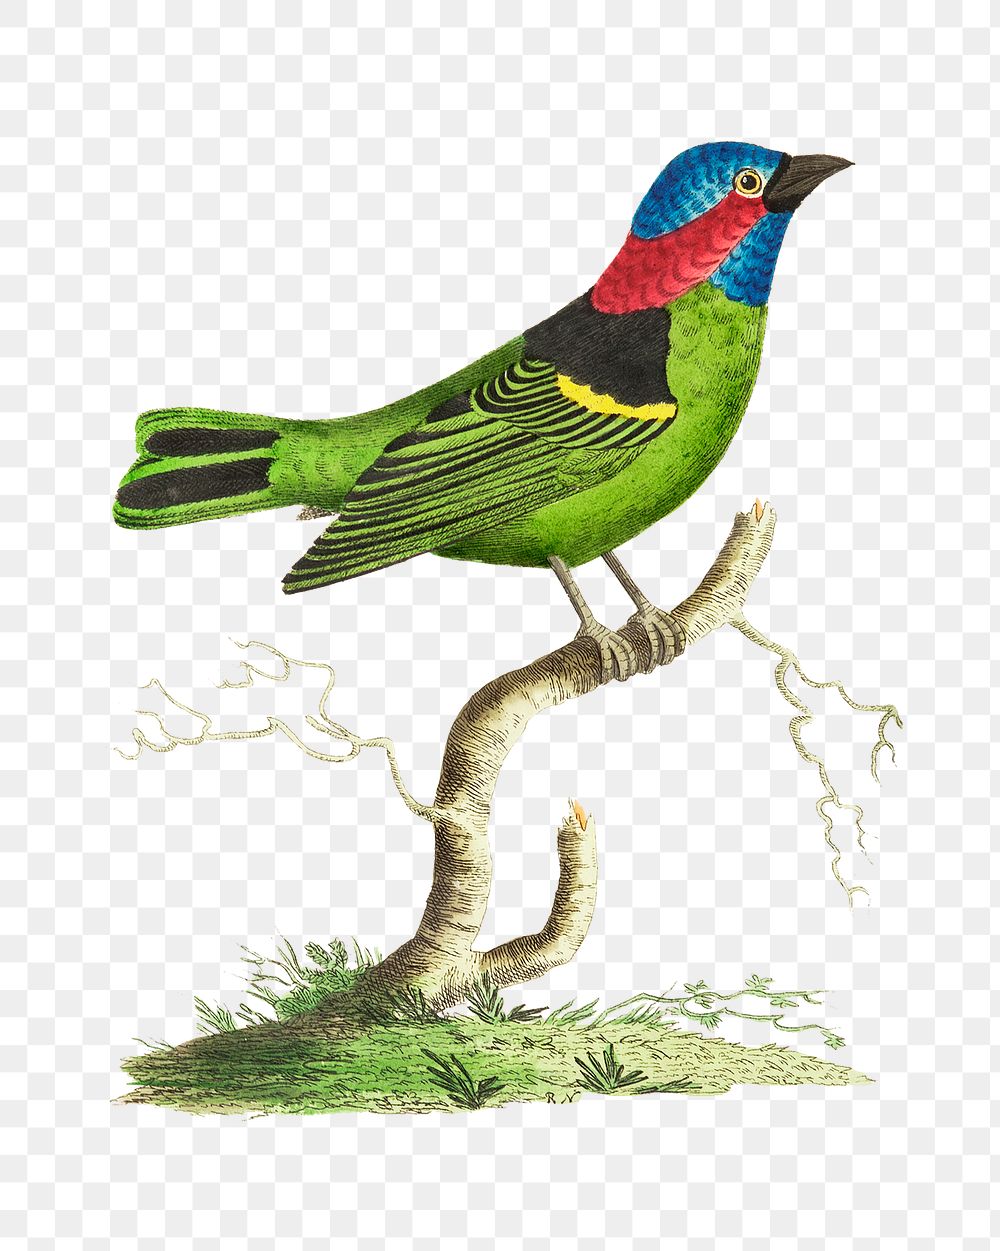 Png hand drawn vintage illustration collared tanager bird